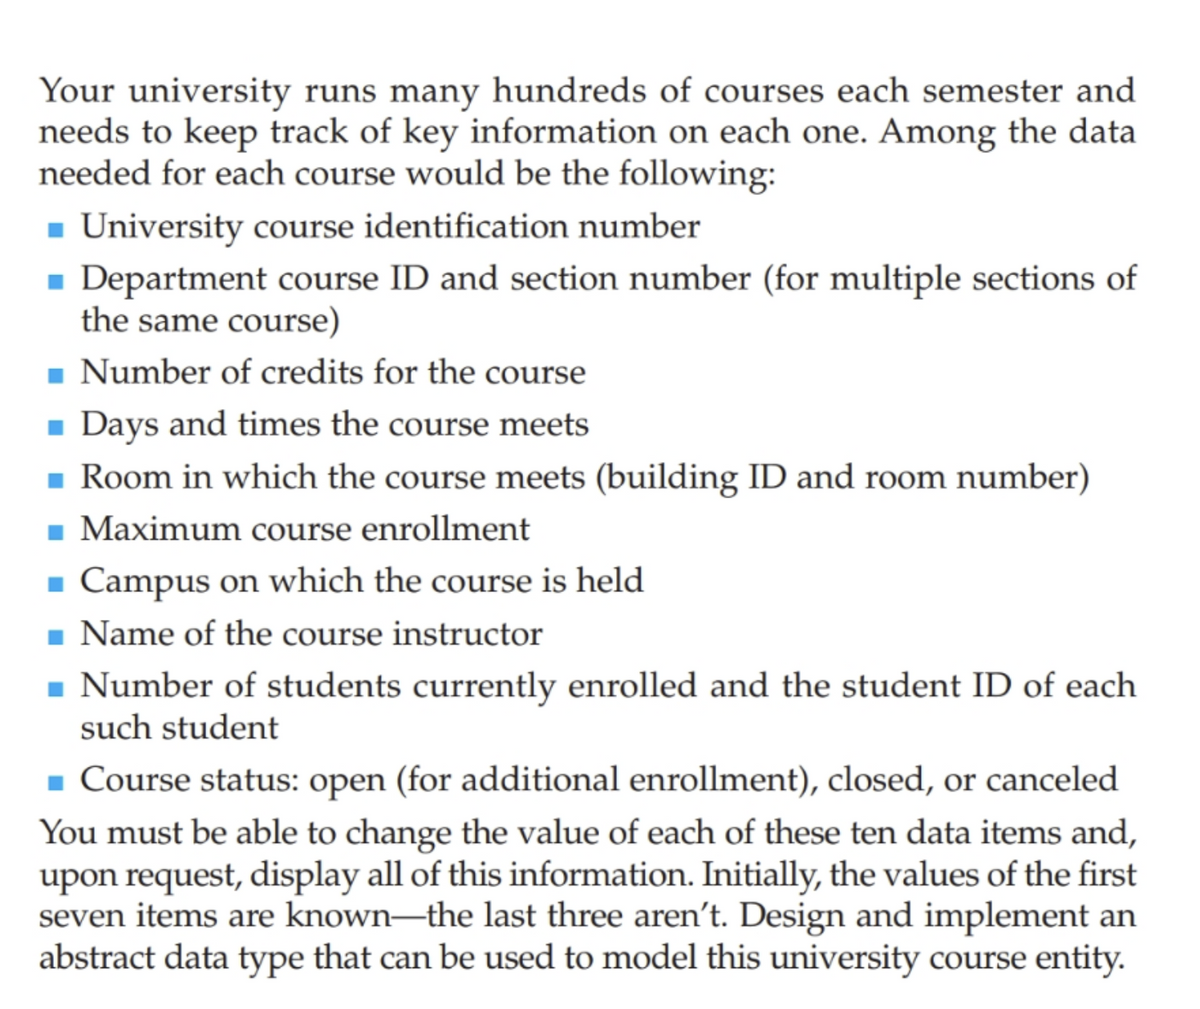 Your university runs many hundreds of courses each semester and
needs to keep track of key information on each one. Among the data
needed for each course would be the following:
- University course identification number
- Department course ID and section number (for multiple sections of
the same course)
- Number of credits for the course
Days and times the course meets
- Room in which the course meets (building ID and room number)
Maximum course enrollment
Campus on which the course is held
- Name of the course instructor
- Number of students currently enrolled and the student ID of each
such student
- Course status: open (for additional enrollment), closed, or canceled
You must be able to change the value of each of these ten data items and,
upon request, display all of this information. Initially, the values of the first
seven items are known–the last three aren't. Design and implement an
abstract data type that can be used to model this university course entity.
